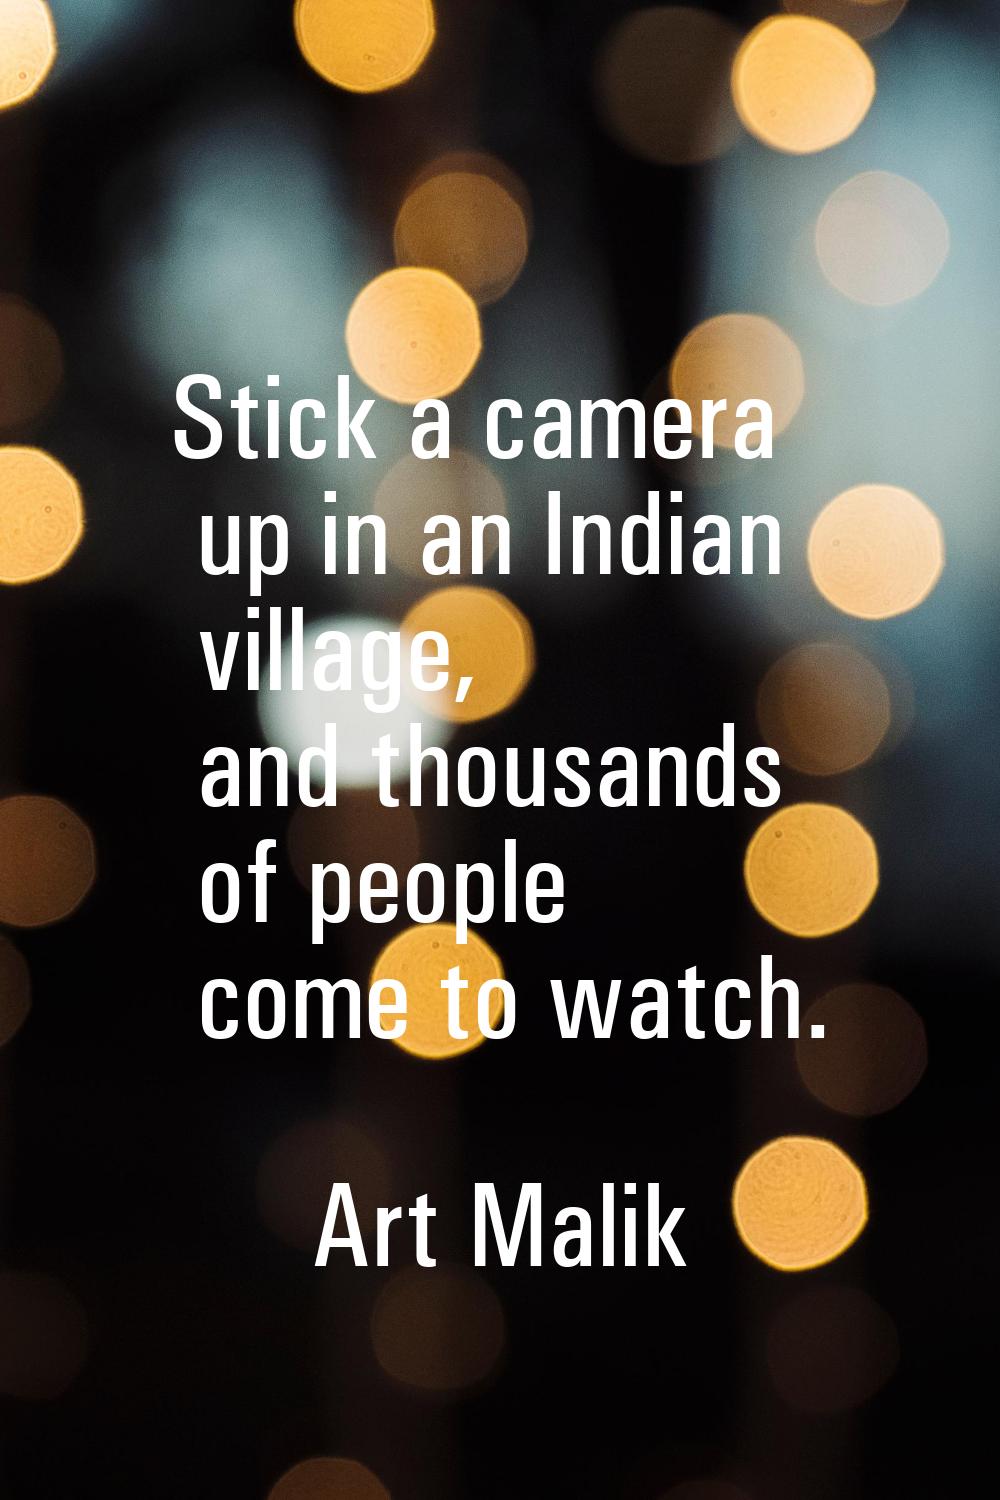 Stick a camera up in an Indian village, and thousands of people come to watch.